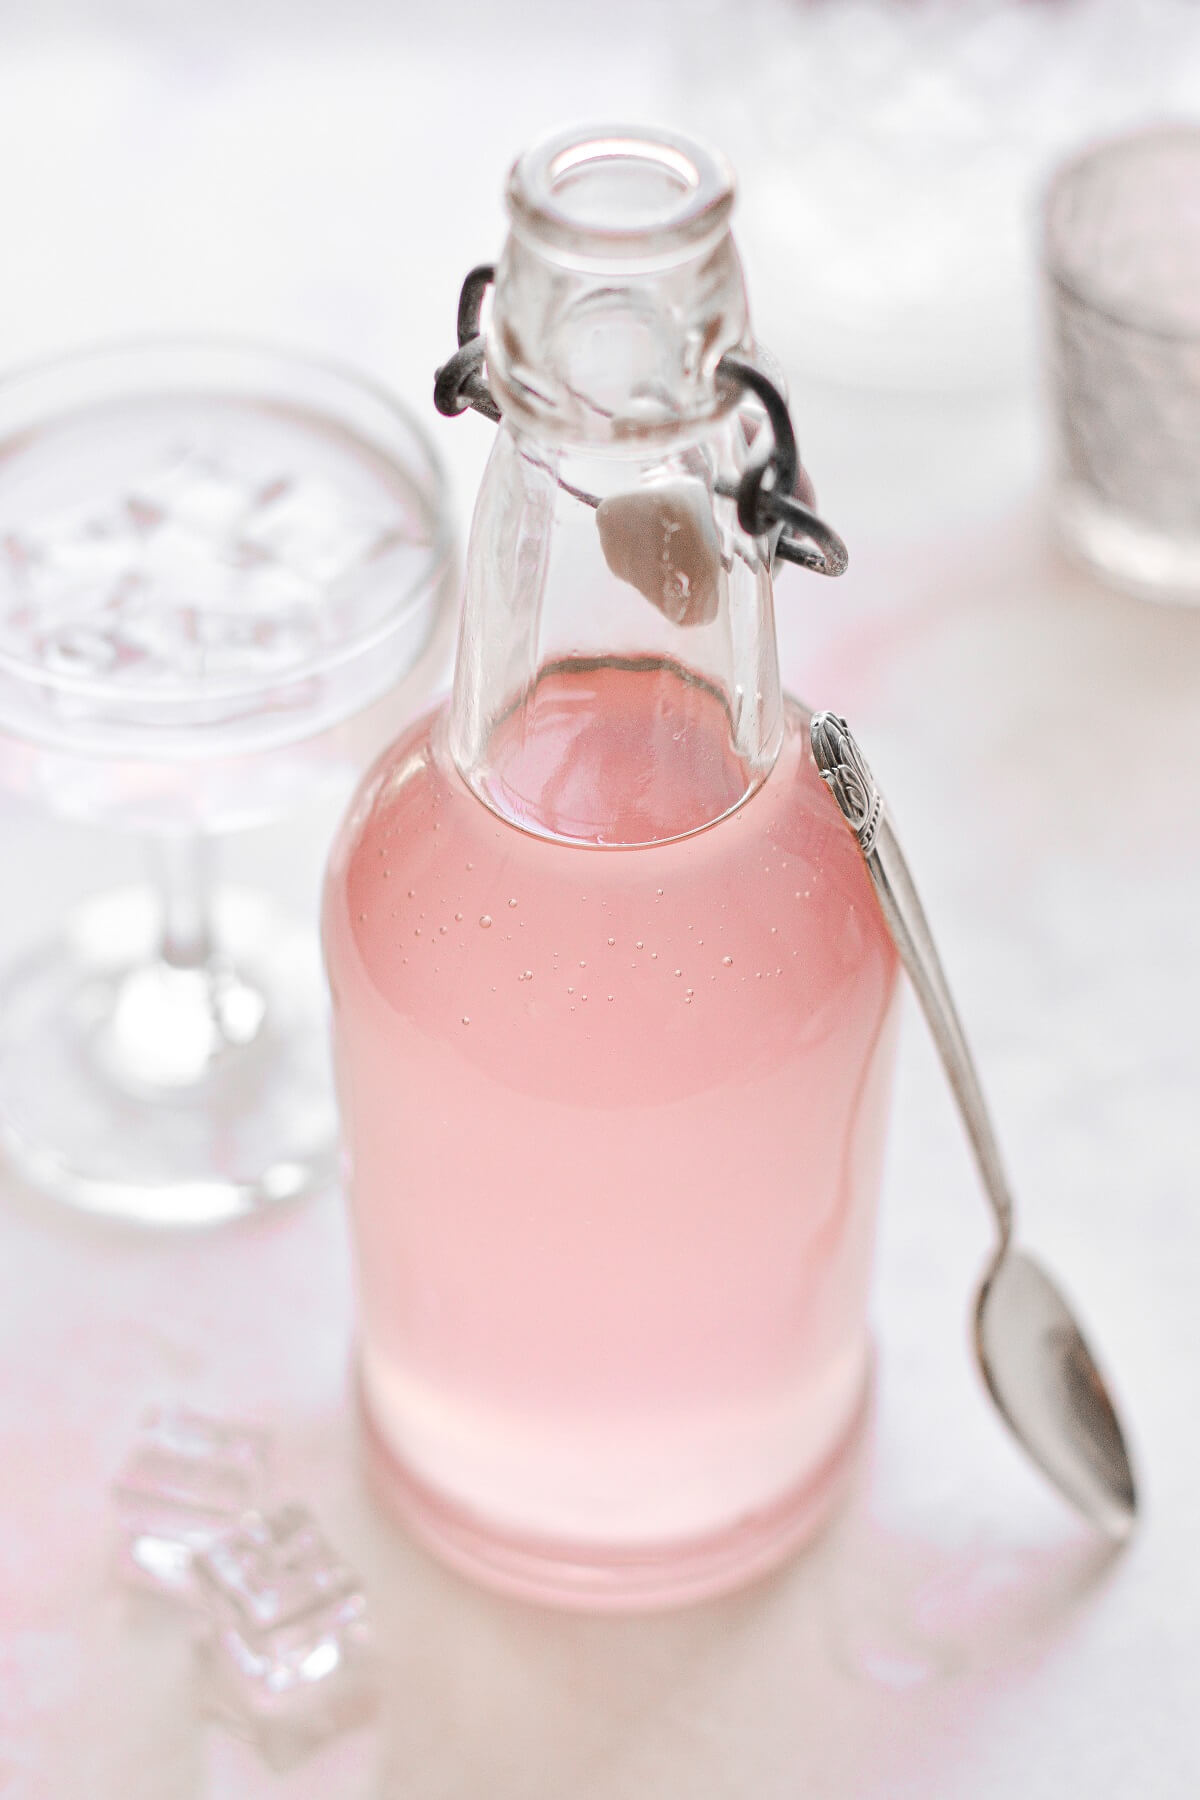 Rhubarb simple syrup in a glass bottle.